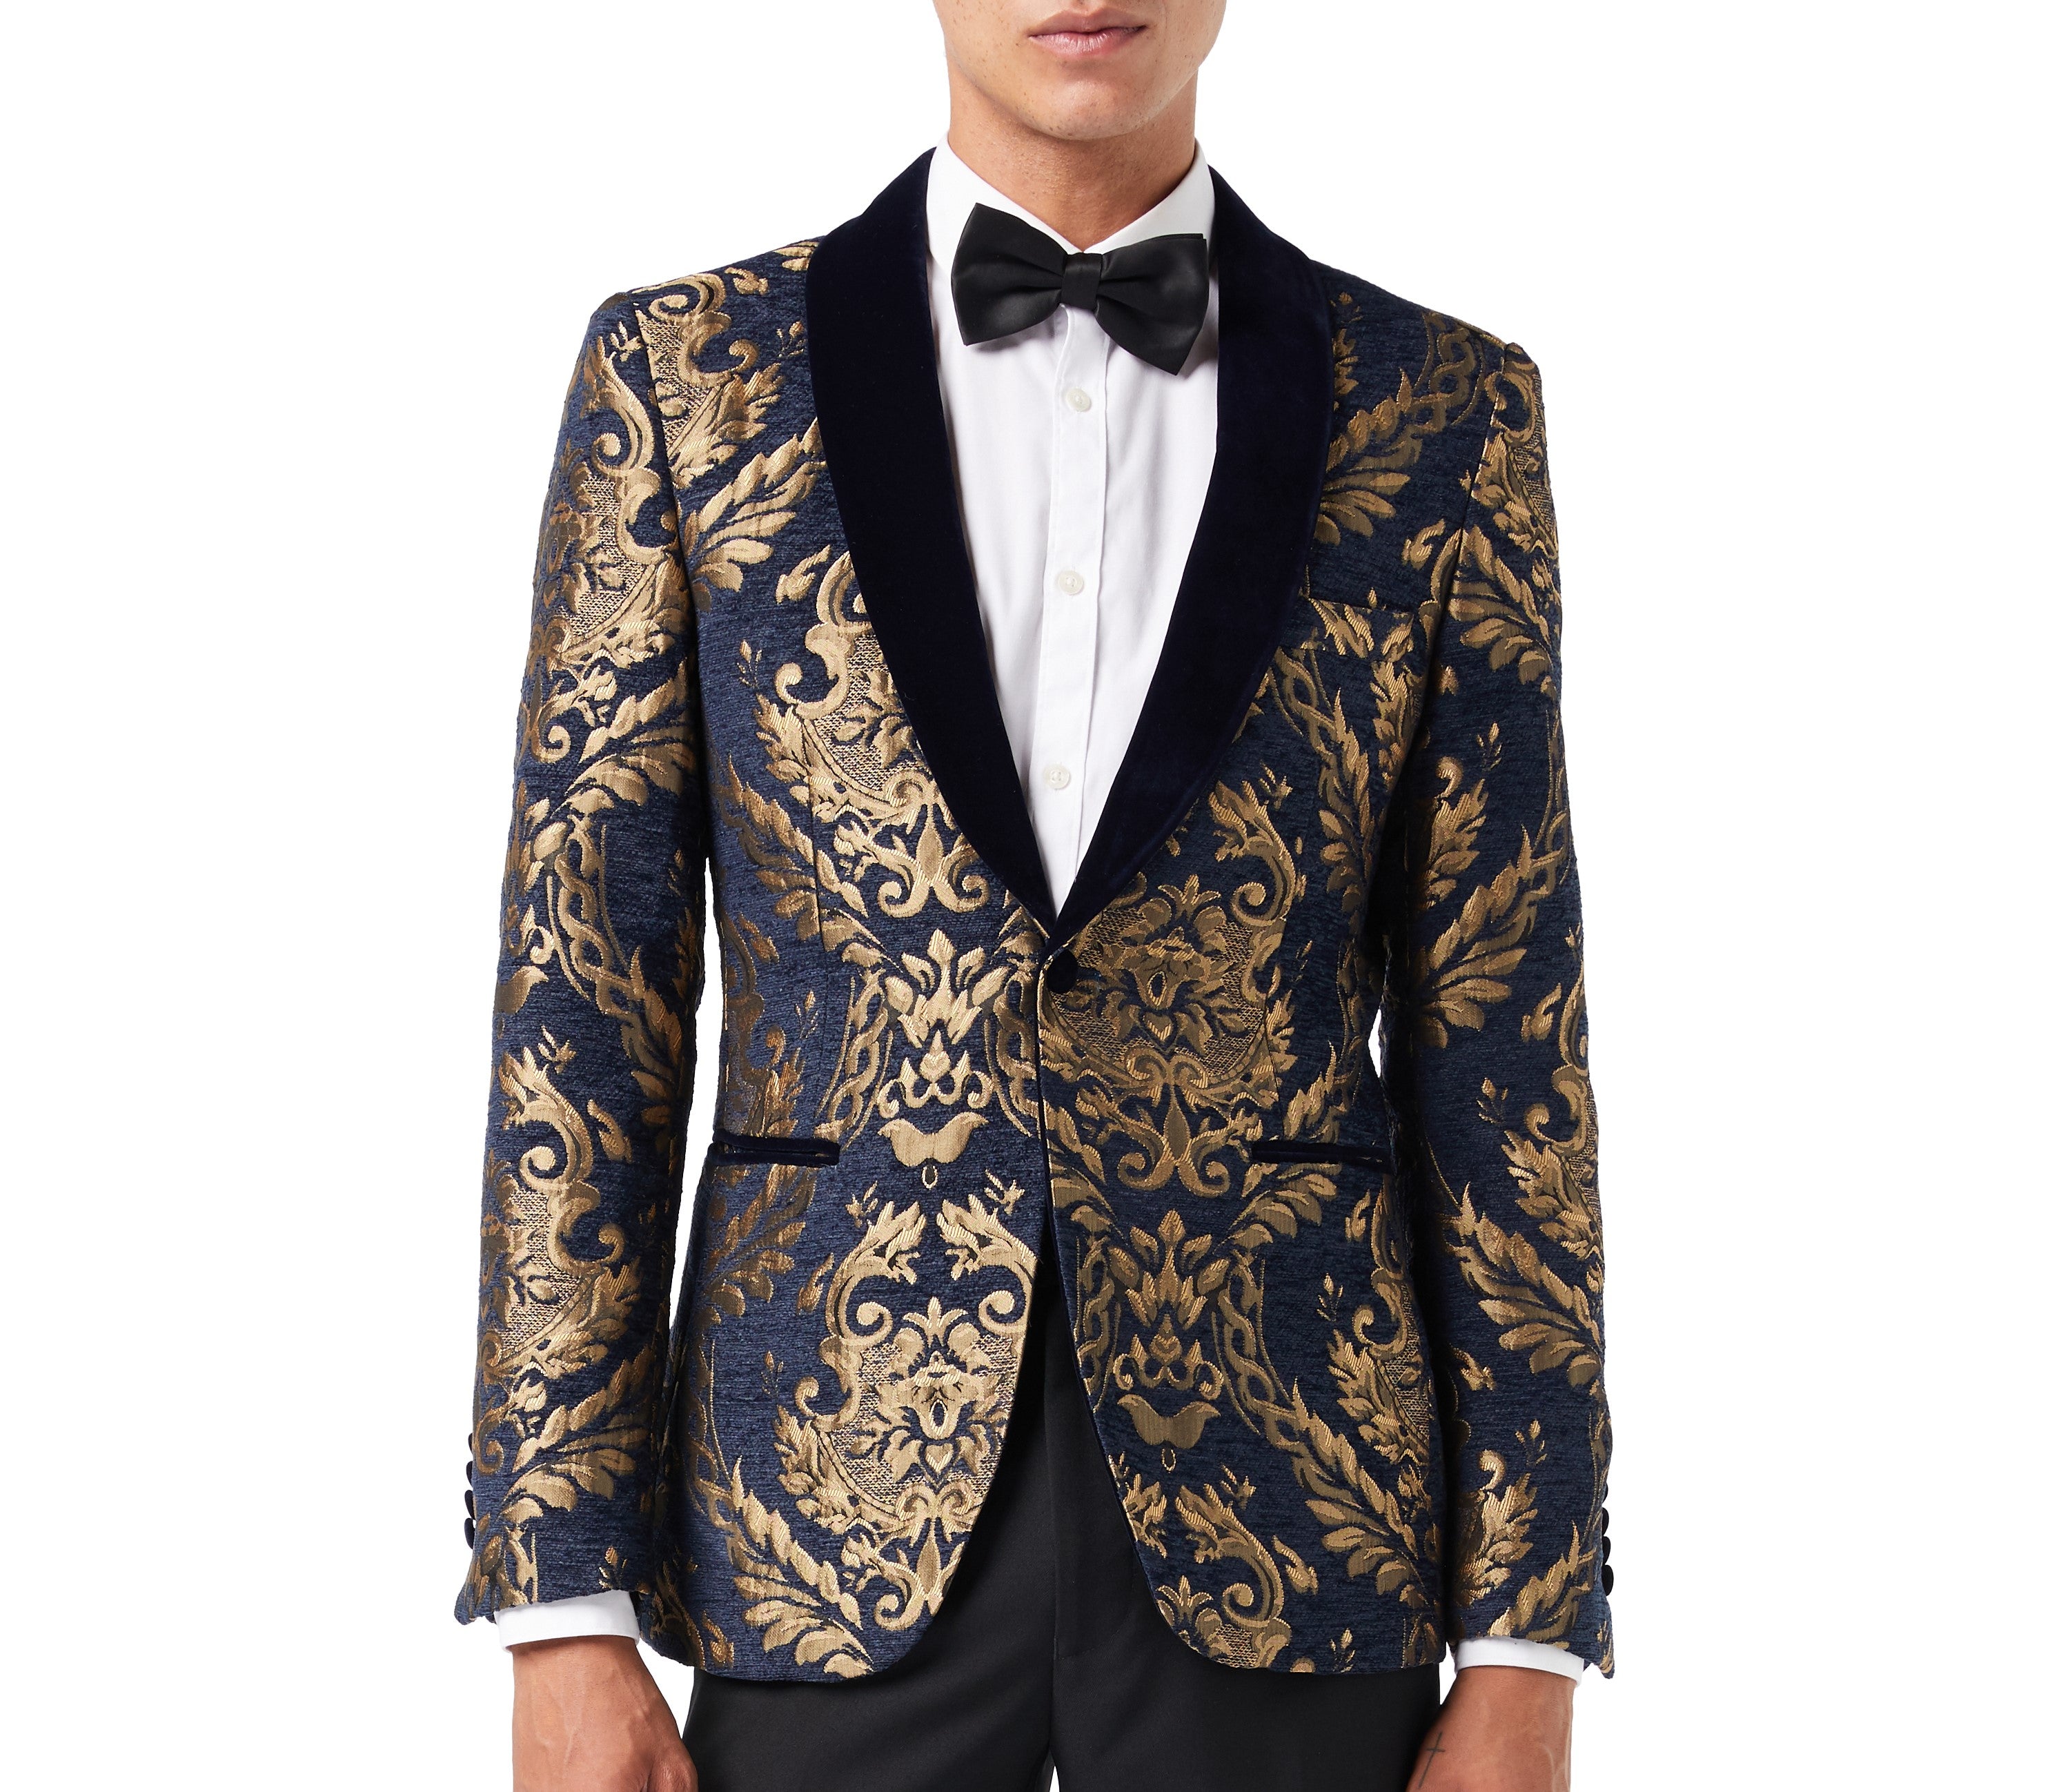 How to Wear a Velvet Jacket – XPOSED